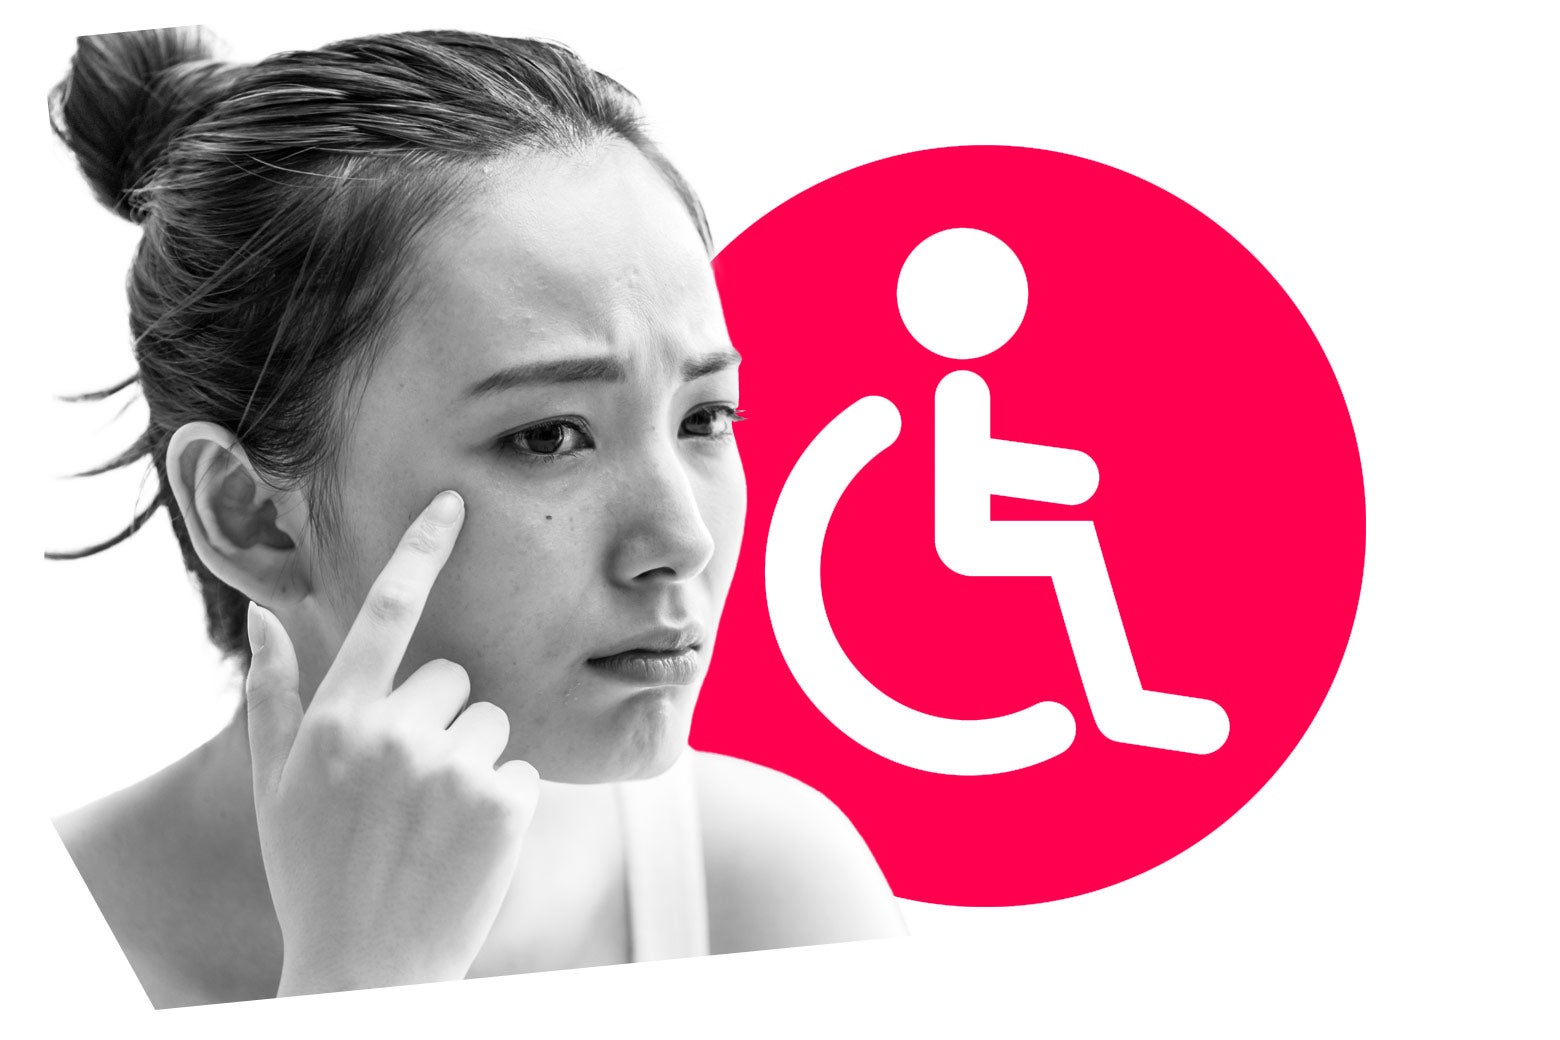 A person points at their face with an illustrated International Symbol of Access behind them.